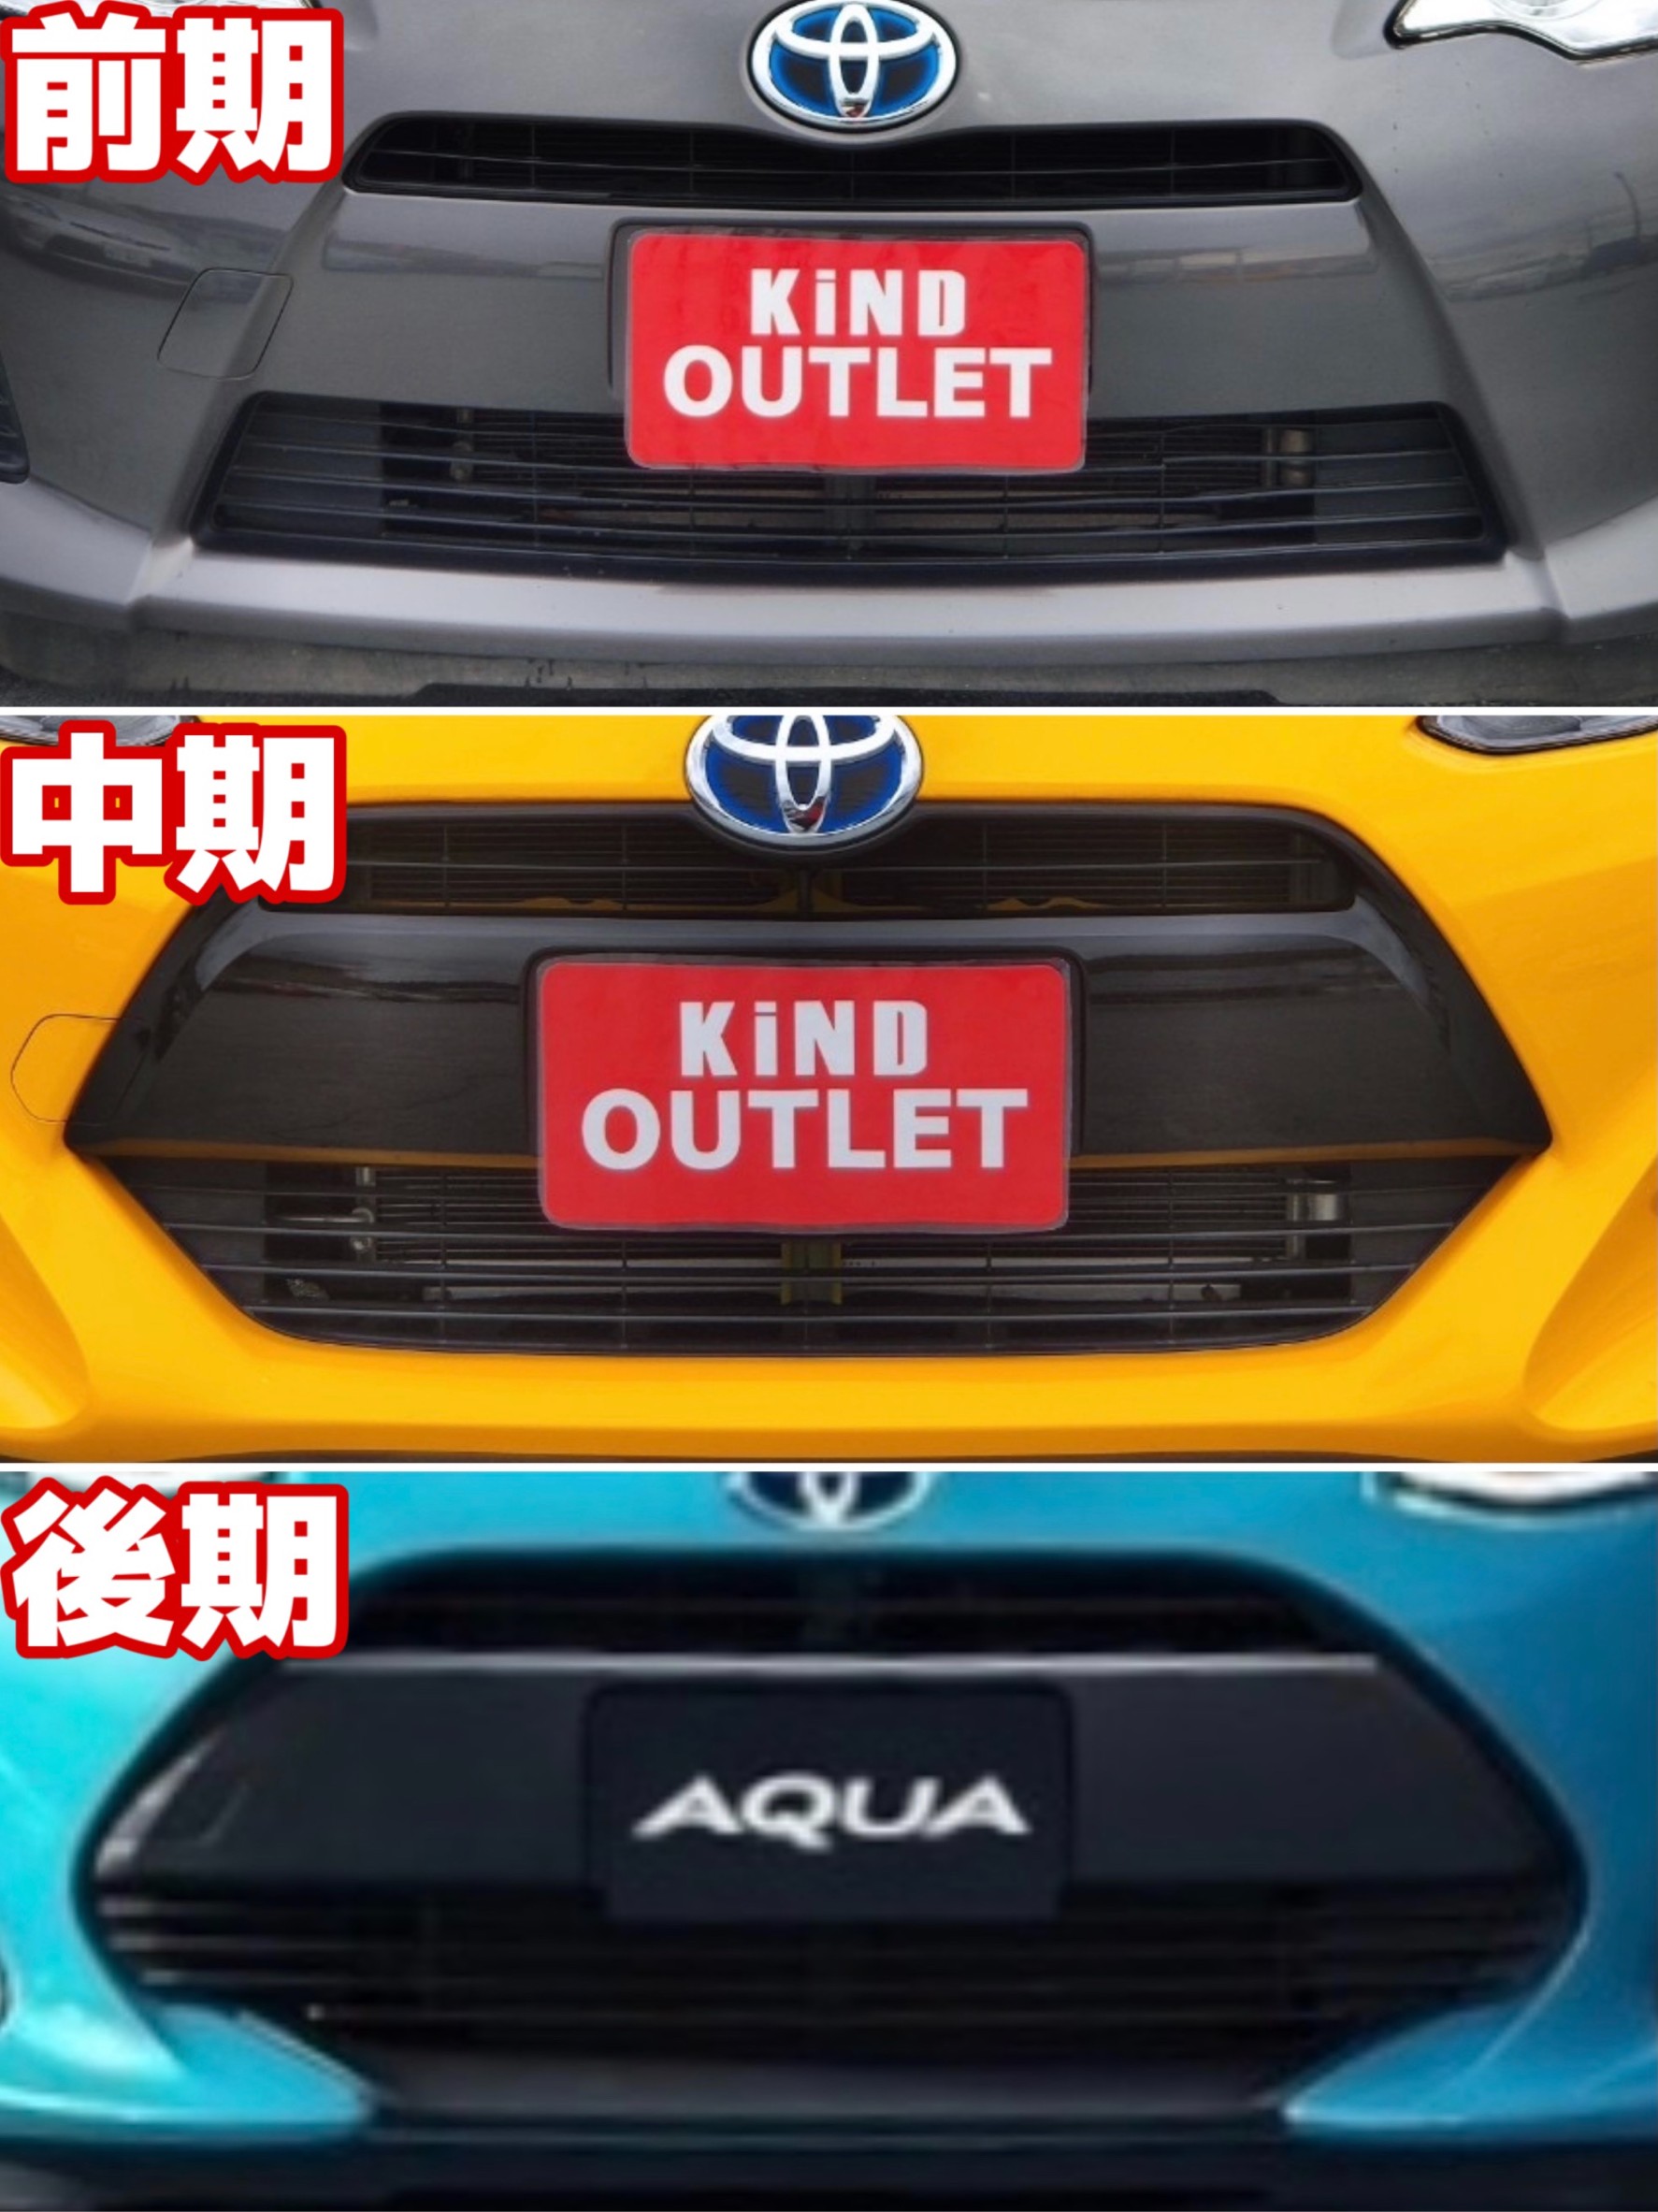 TOYOTA【アクア】編!!前期・中期・後期の「簡単」見分け方!! | KiND OUTLET